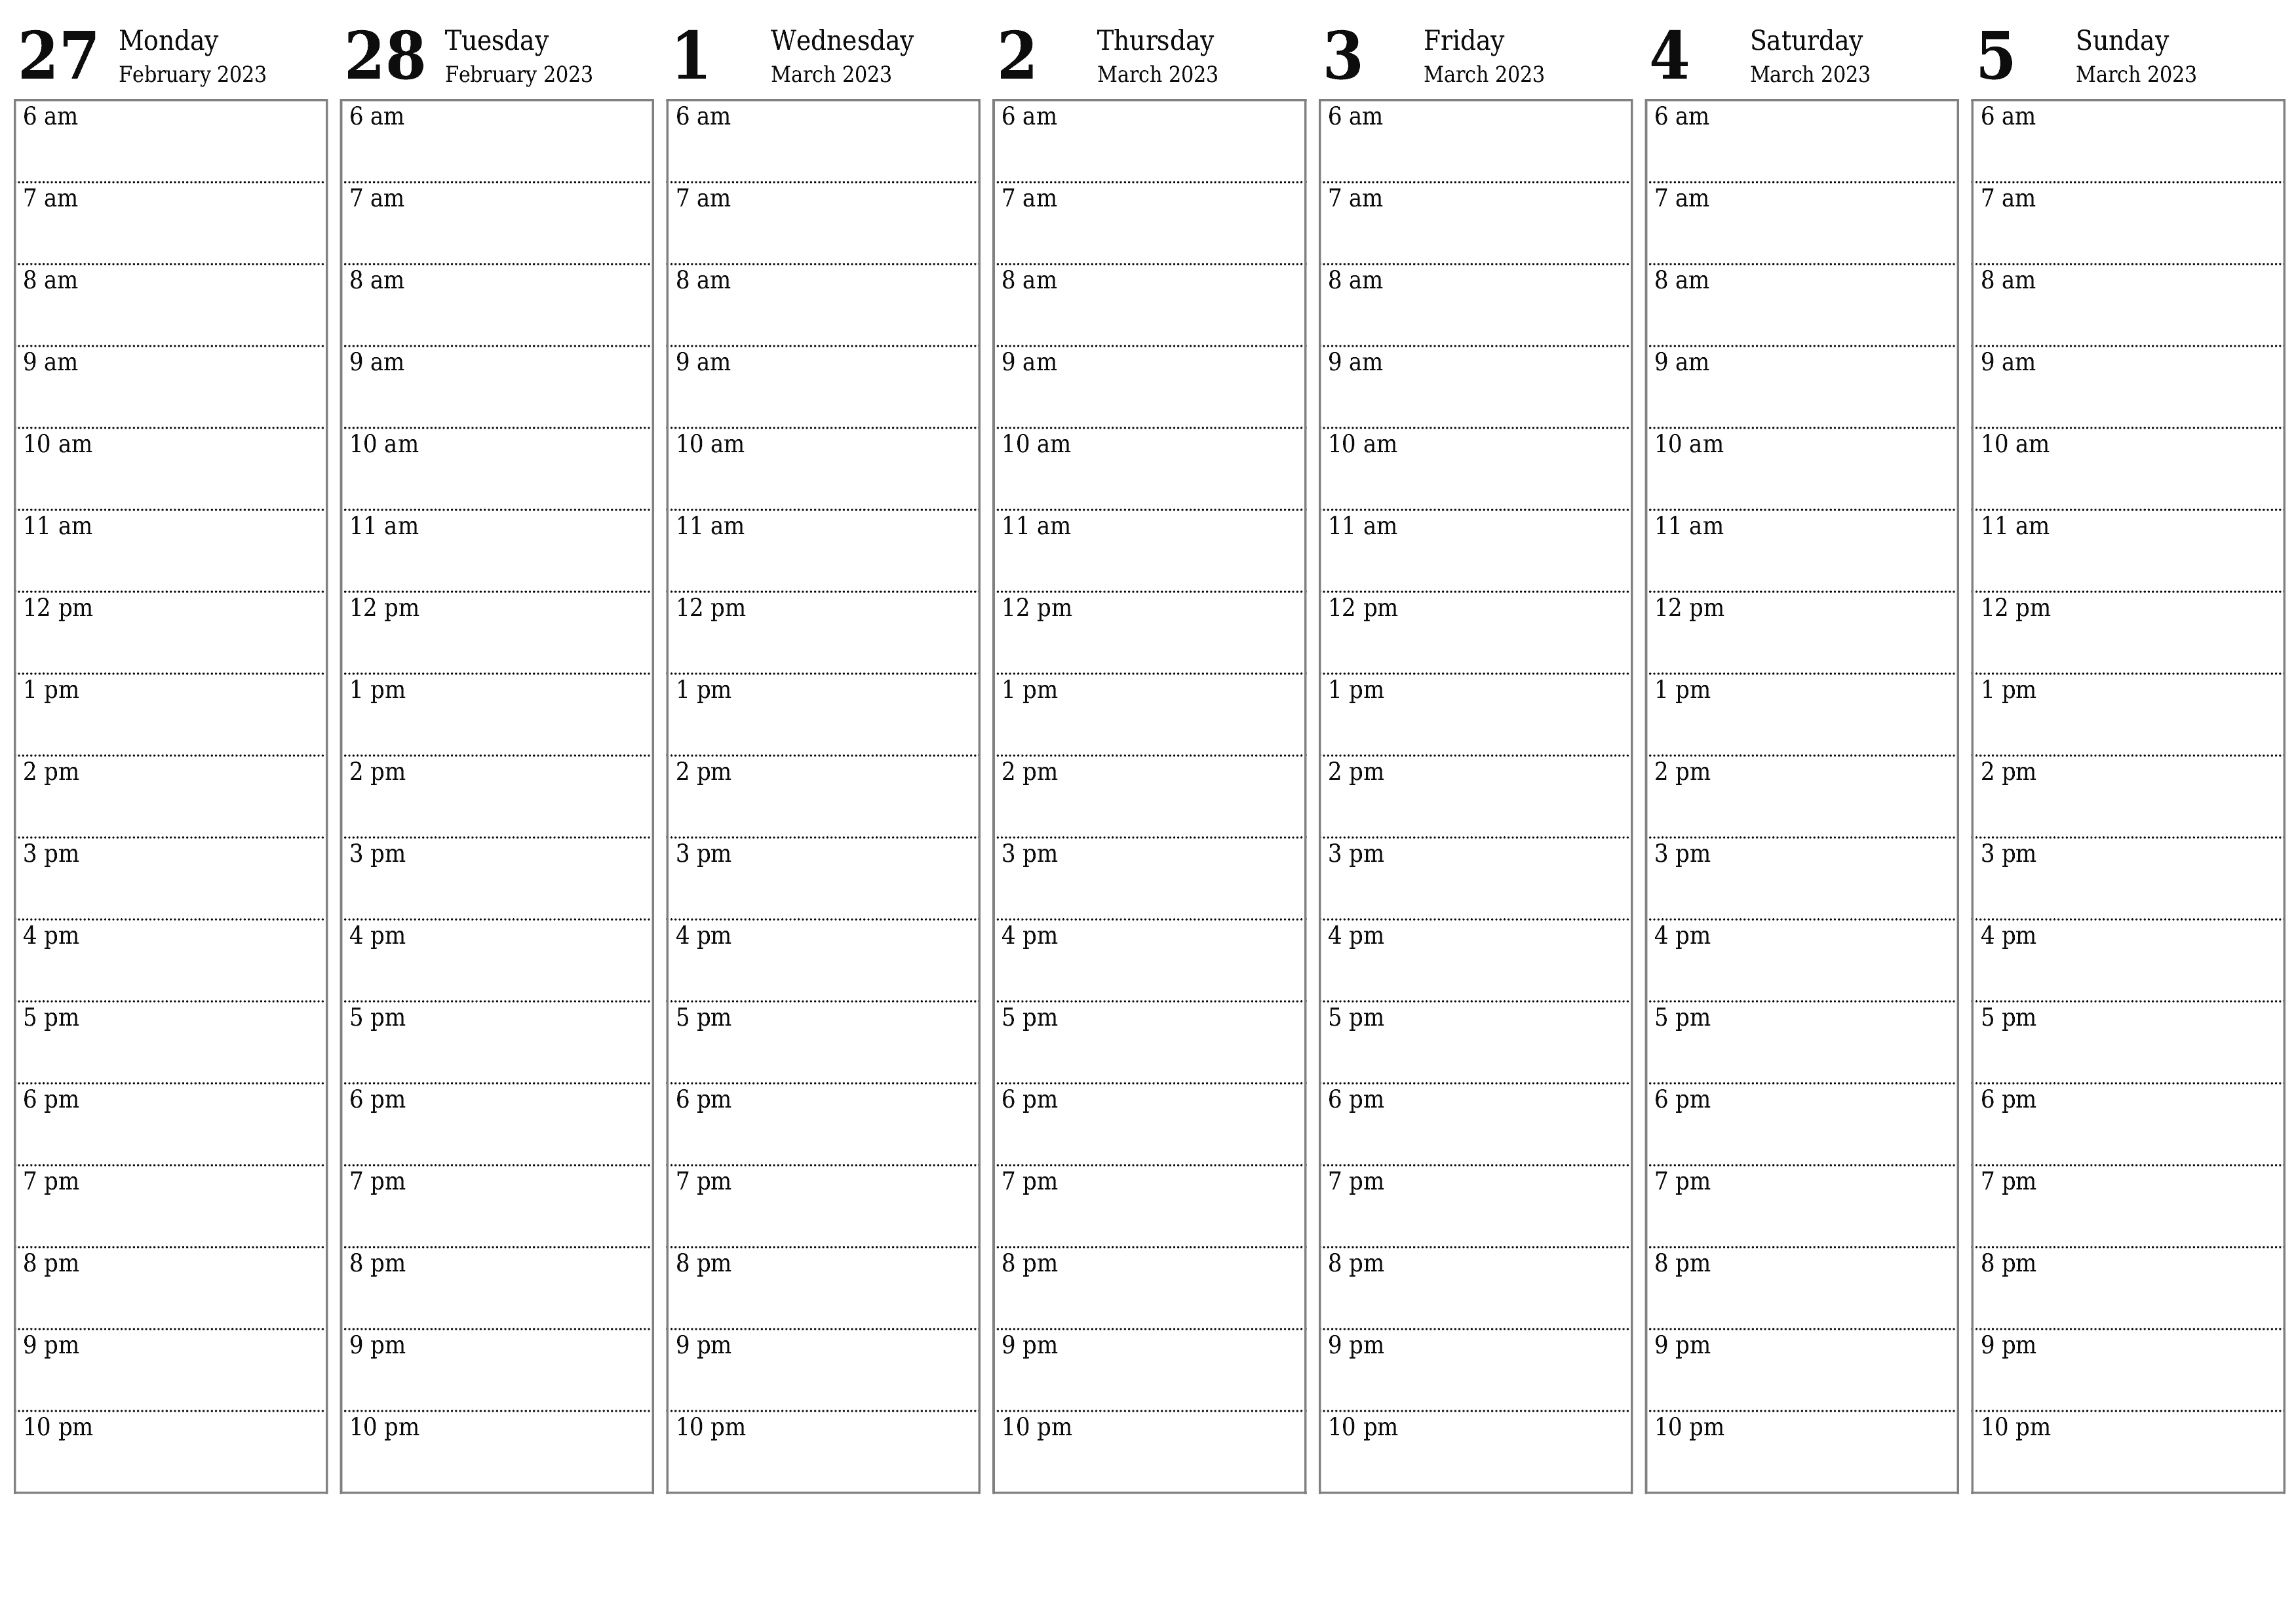 Blank weekly printable calendar and planner for week March 2023 with notes, save and print to PDF PNG English - 7calendar.com